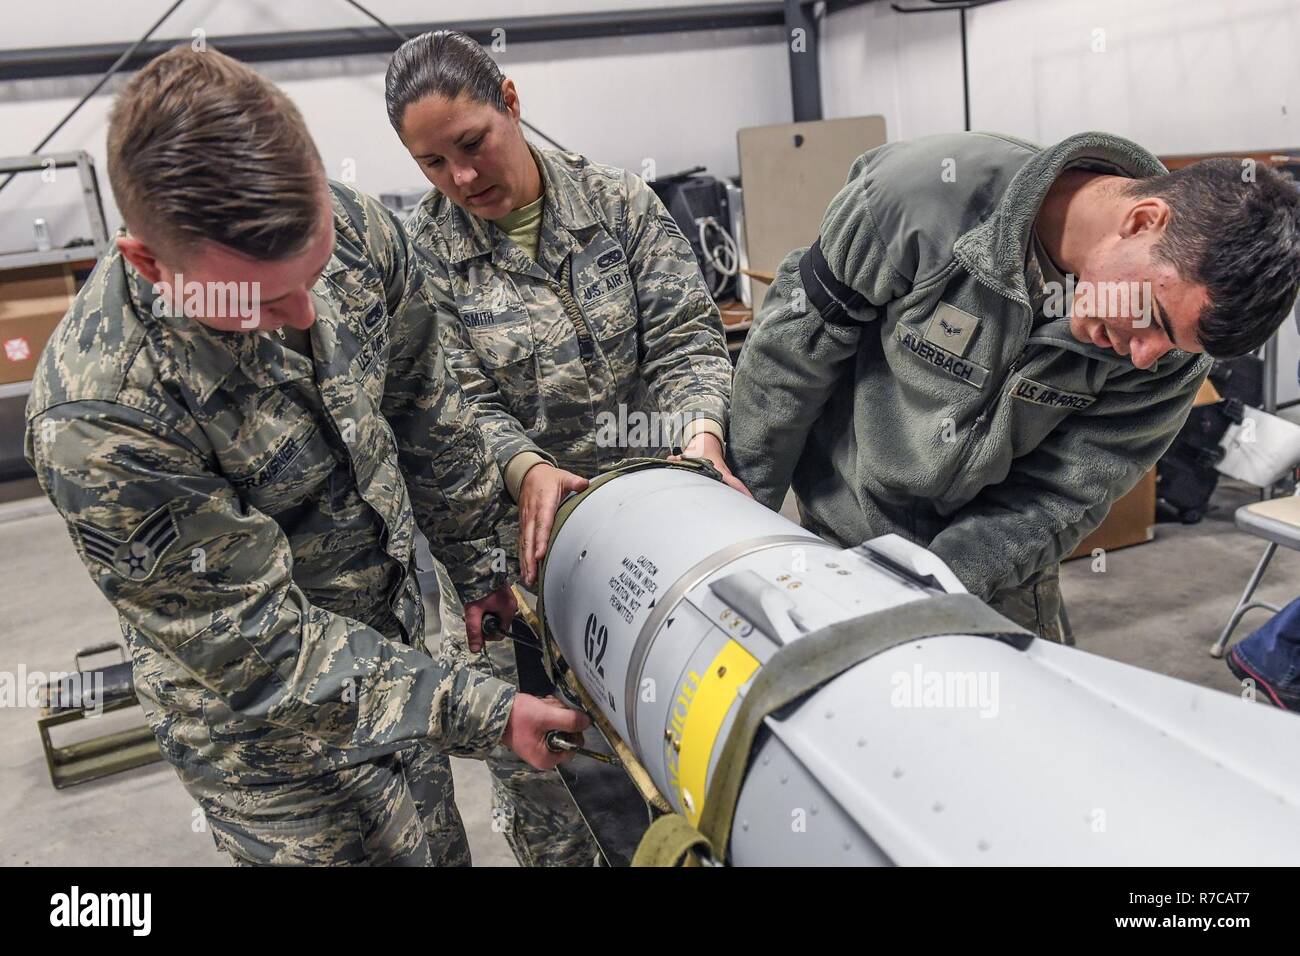 From the left, Senior Airman Troy Praisner, Senior Airman Lauren Smith and Airman 1st Class Anthony Auerbach, all from the 23rd Equipment Maintenance Squadron, Moody Air Force Base, Georgia, remove the guidance control system from an AGM-65 Maverick air-to-surface guided missile at Hill Air Force Base, Utah, April 26. The Airmen participated in Combat Hammer, an air-to-ground weapons evaluation exercise conducted by the 86th Fighter Weapons Squadron which collects and analyzes data on the performance of precision weapons and measures their suitability for use in combat. Stock Photo